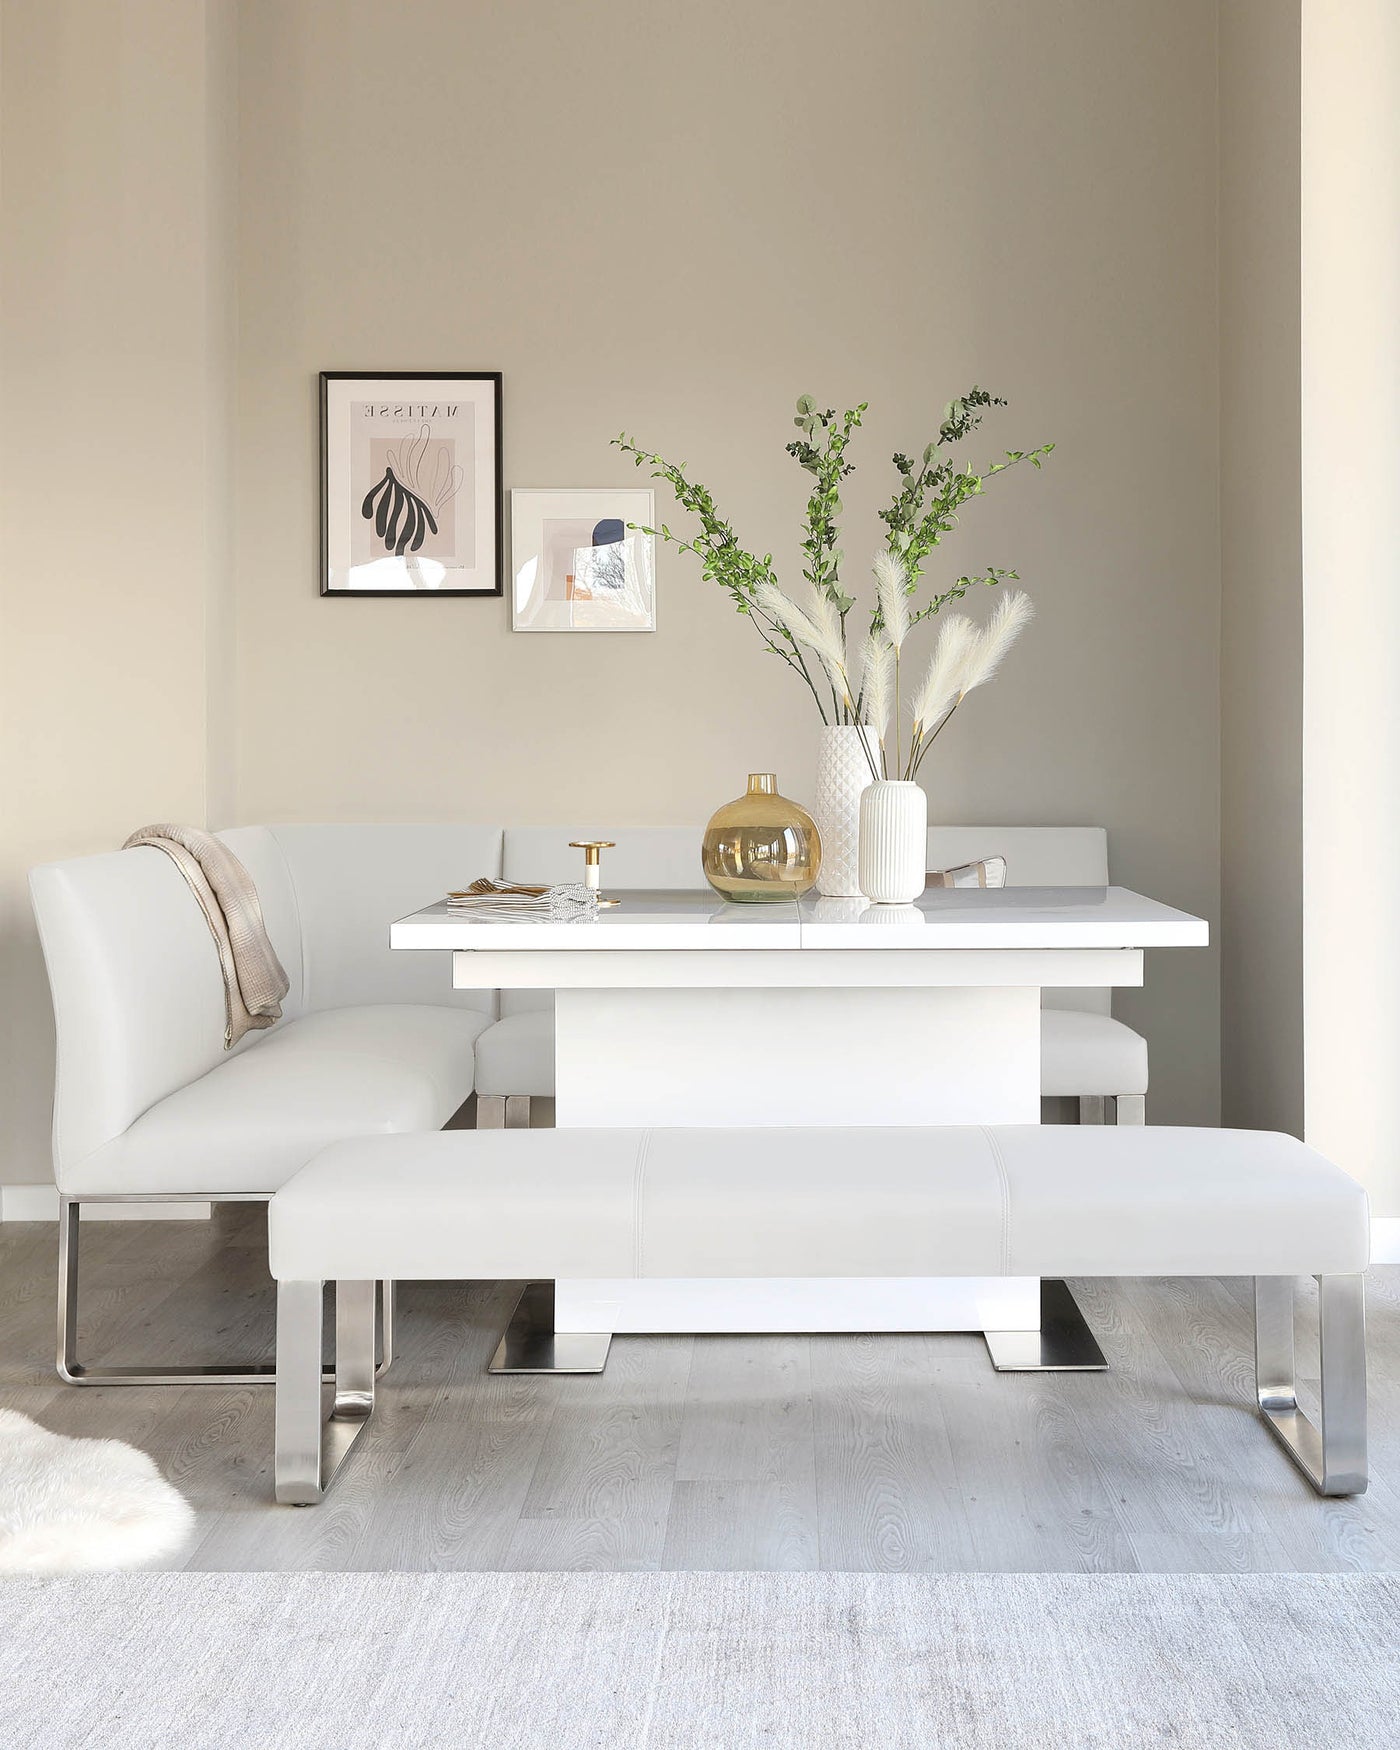 A modern minimalist dining set featuring a white rectangular table with a glossy finish and sleek chrome legs. Accompanying the table is a white leather corner bench with clean lines and chrome legs, flanked by a matching white leather ottoman. The setting is complemented by a soft white rug beneath.